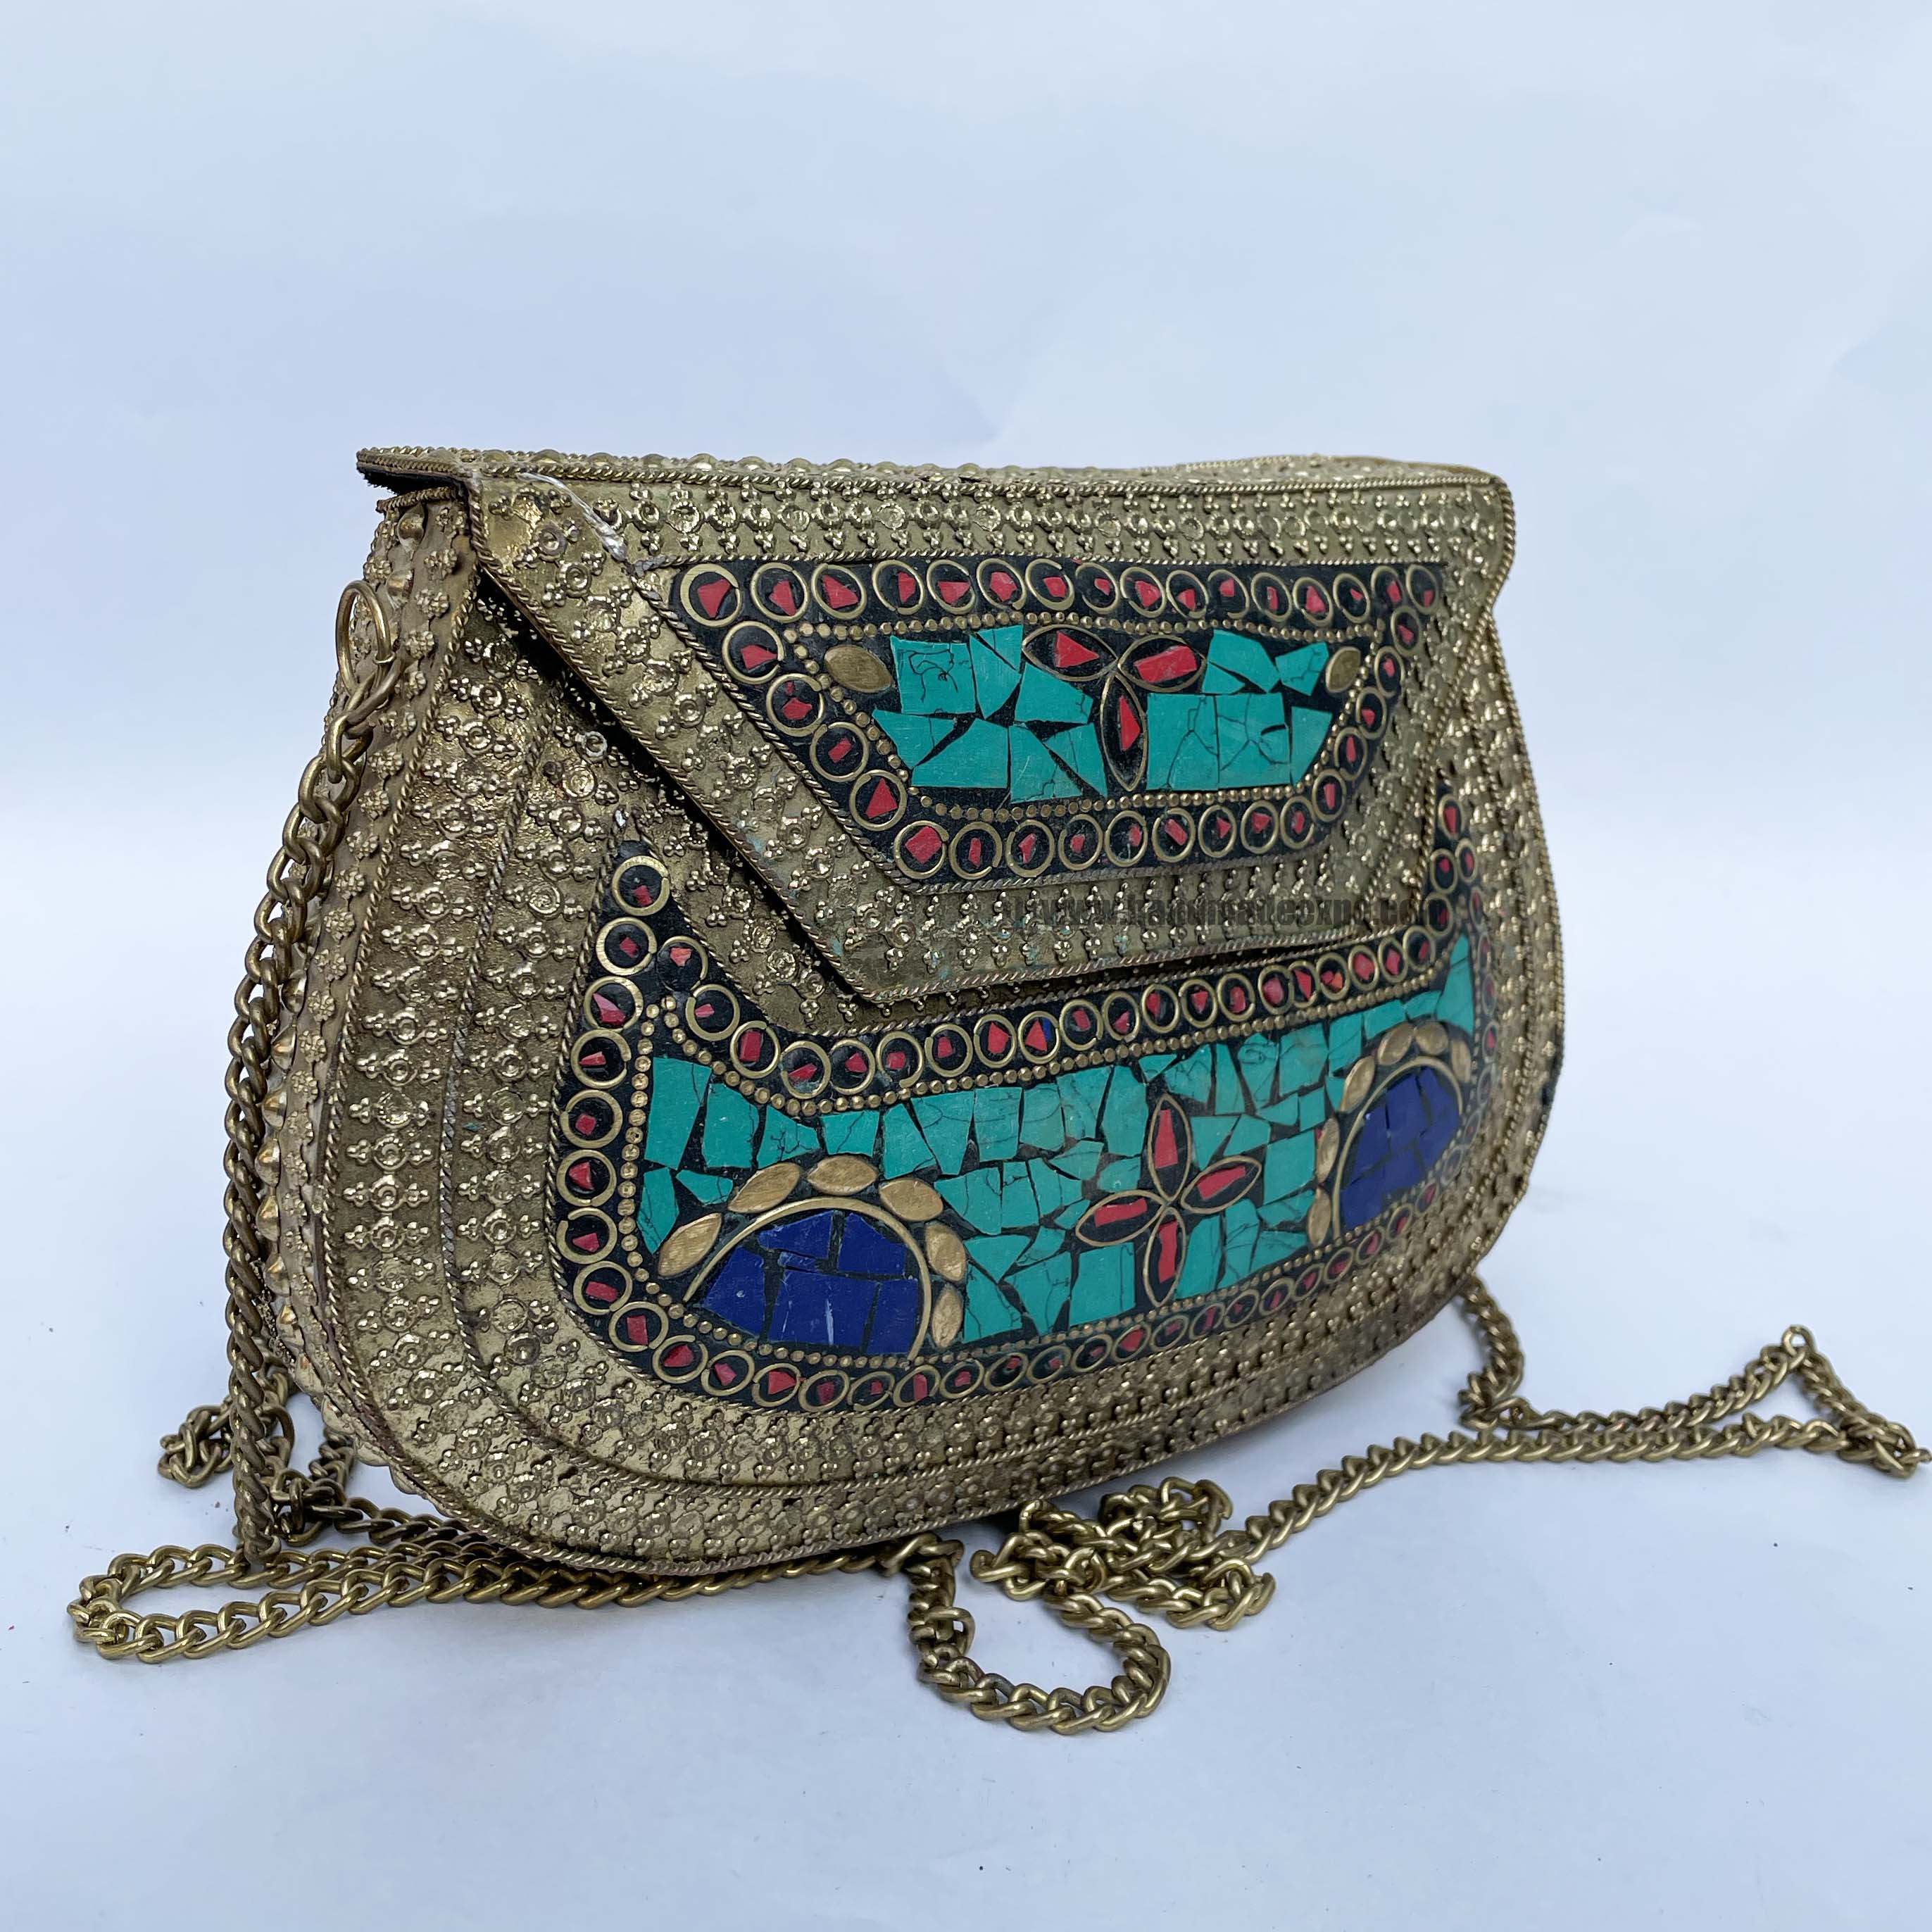 Nepali Handmade Big Ladies Bag With stone Setting, metal, golden And Blue Color